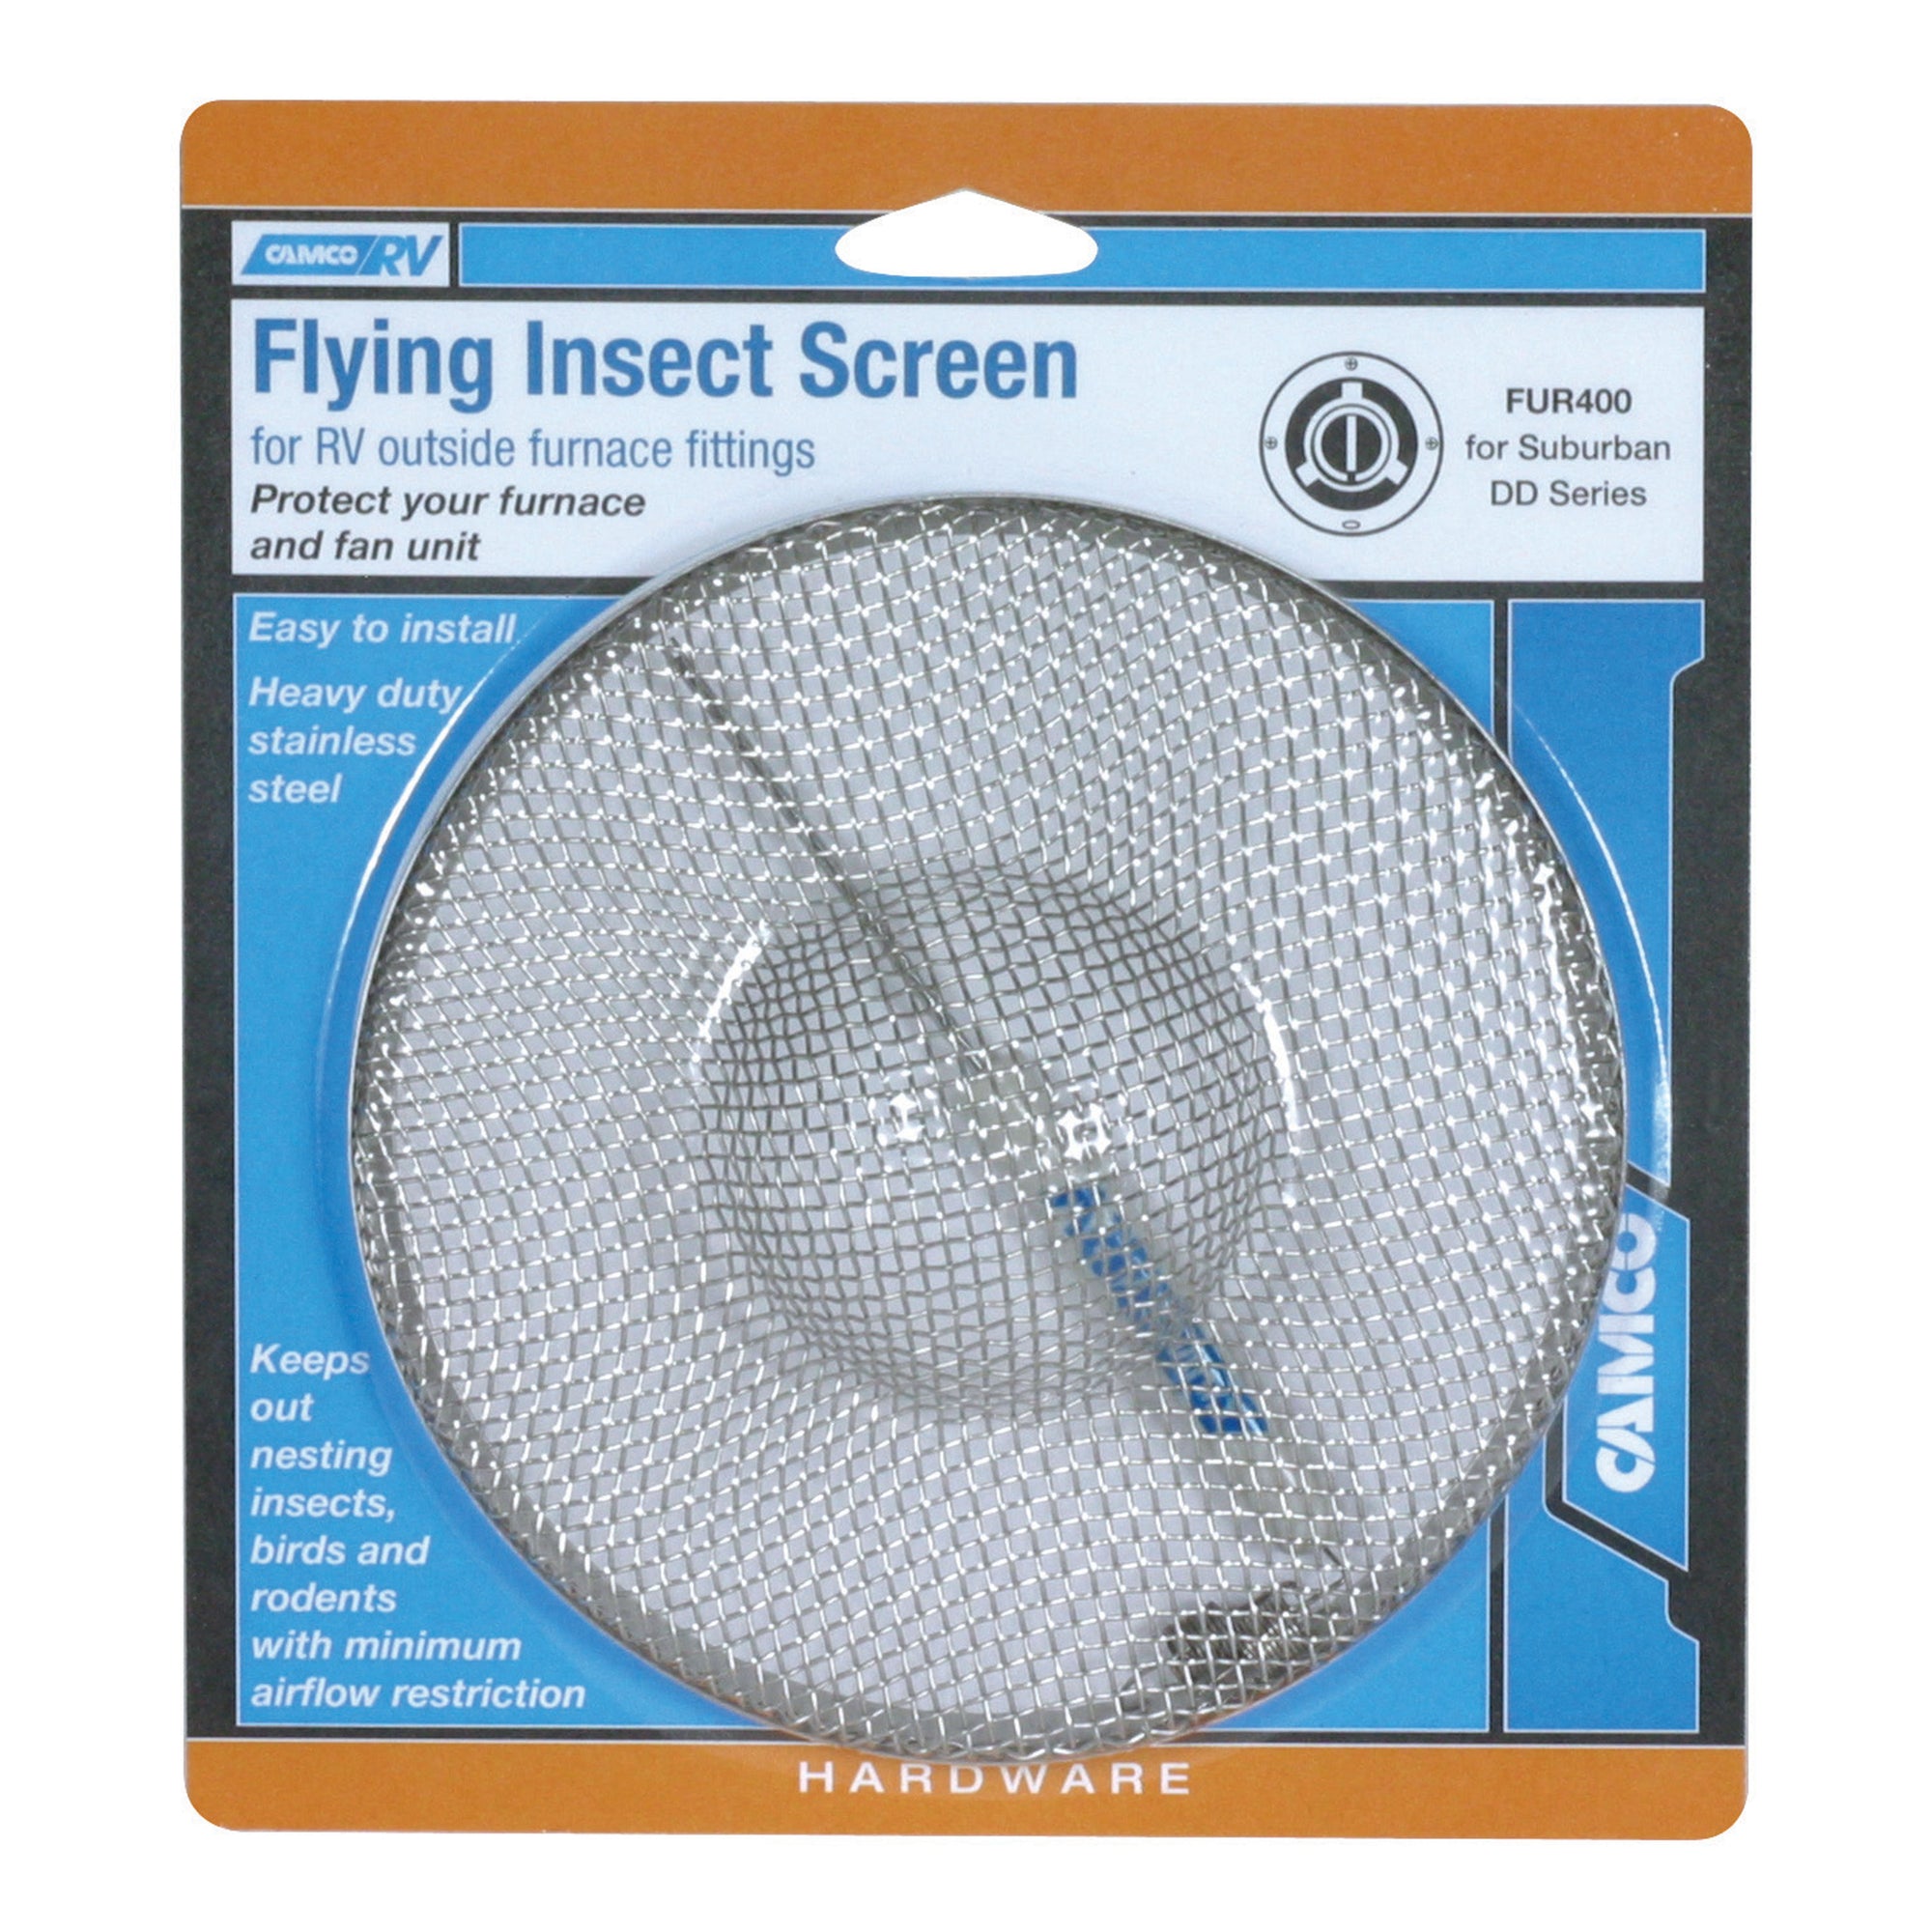 Camco 42143 Insect Screen For Rv Furnace And Fan Unit Outside Fittings - Fur400: Suburban Dd Series